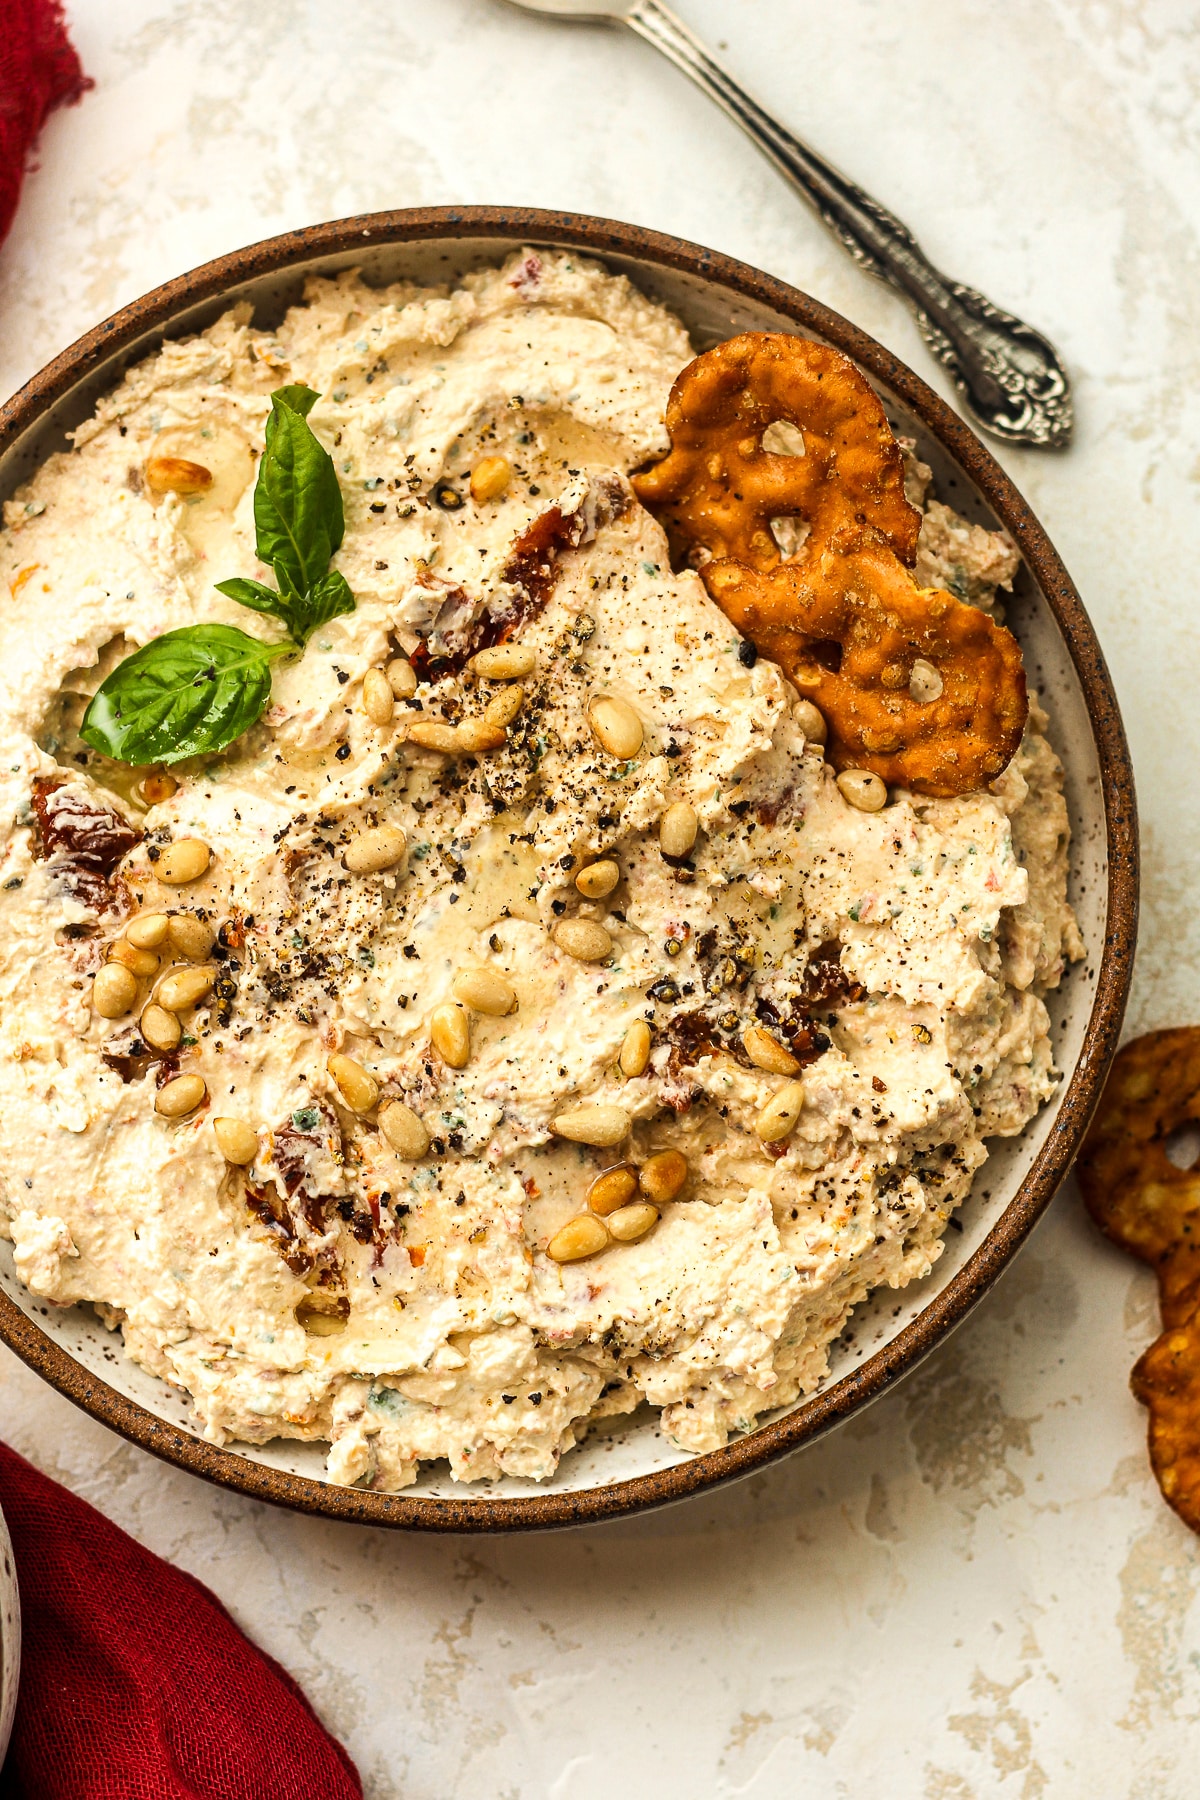 Overhead view of a bowl of cream cheese dip with sun-dried tomatoes.